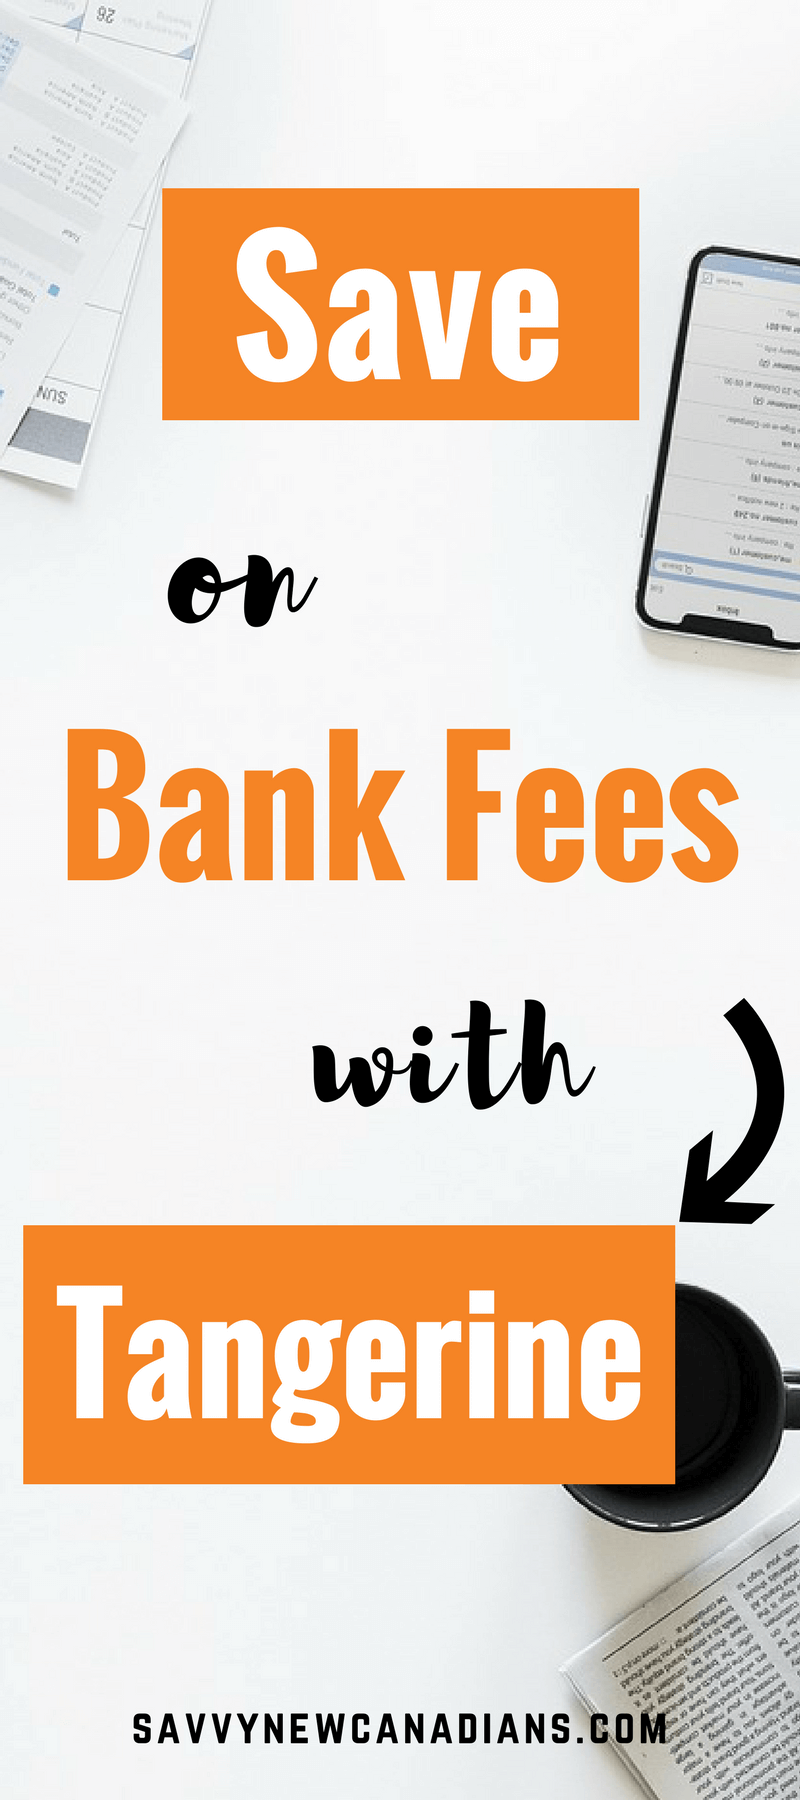 Tangerine Bank Review 2022: Free Bank Accounts, Pros, Cons and Fees